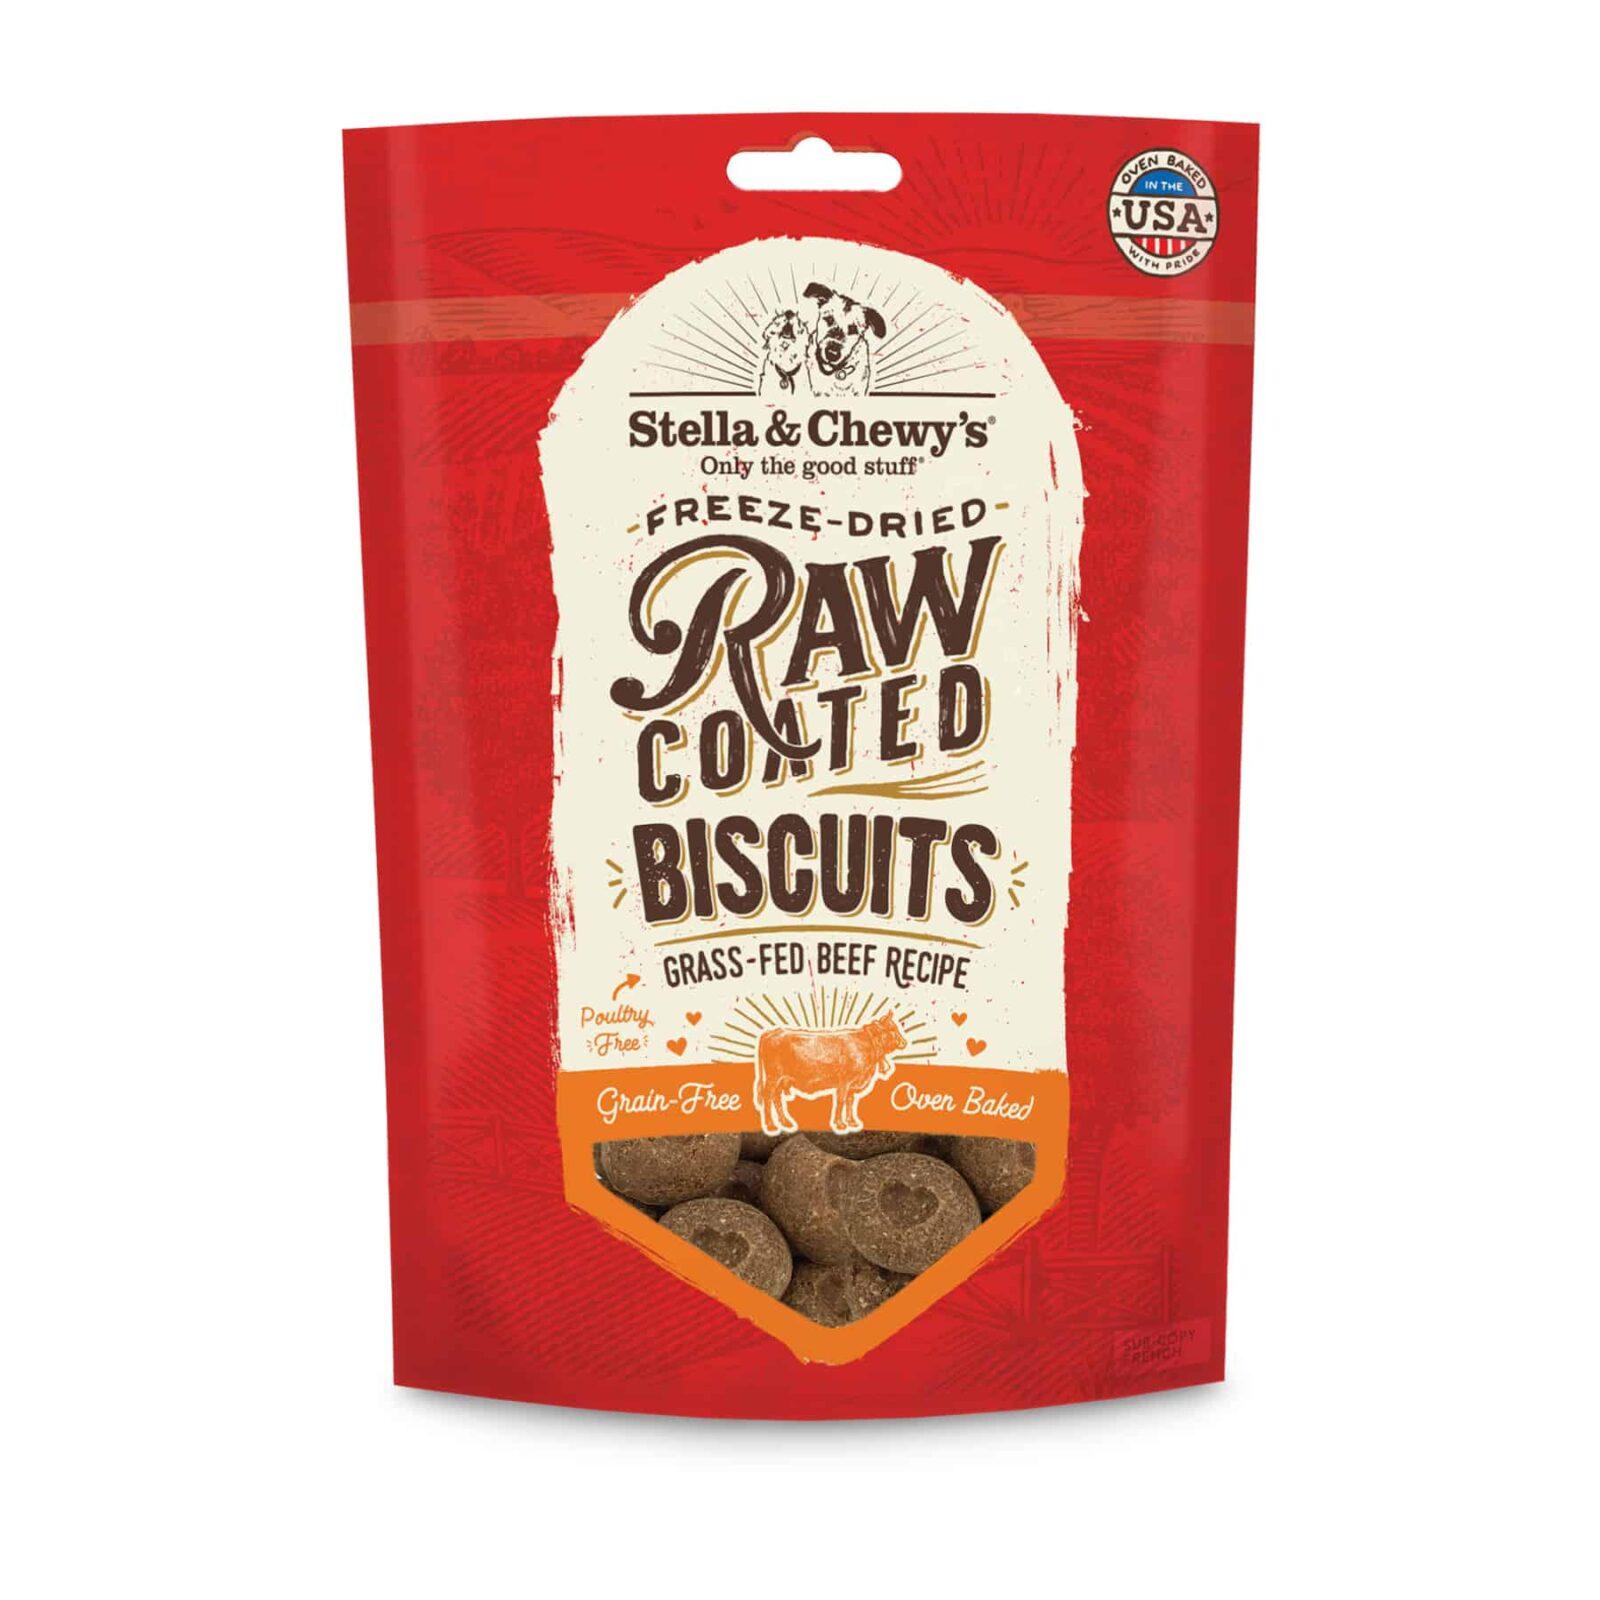  Stella & Chewy's Grass- Fed Beef Raw Coated Biscuits